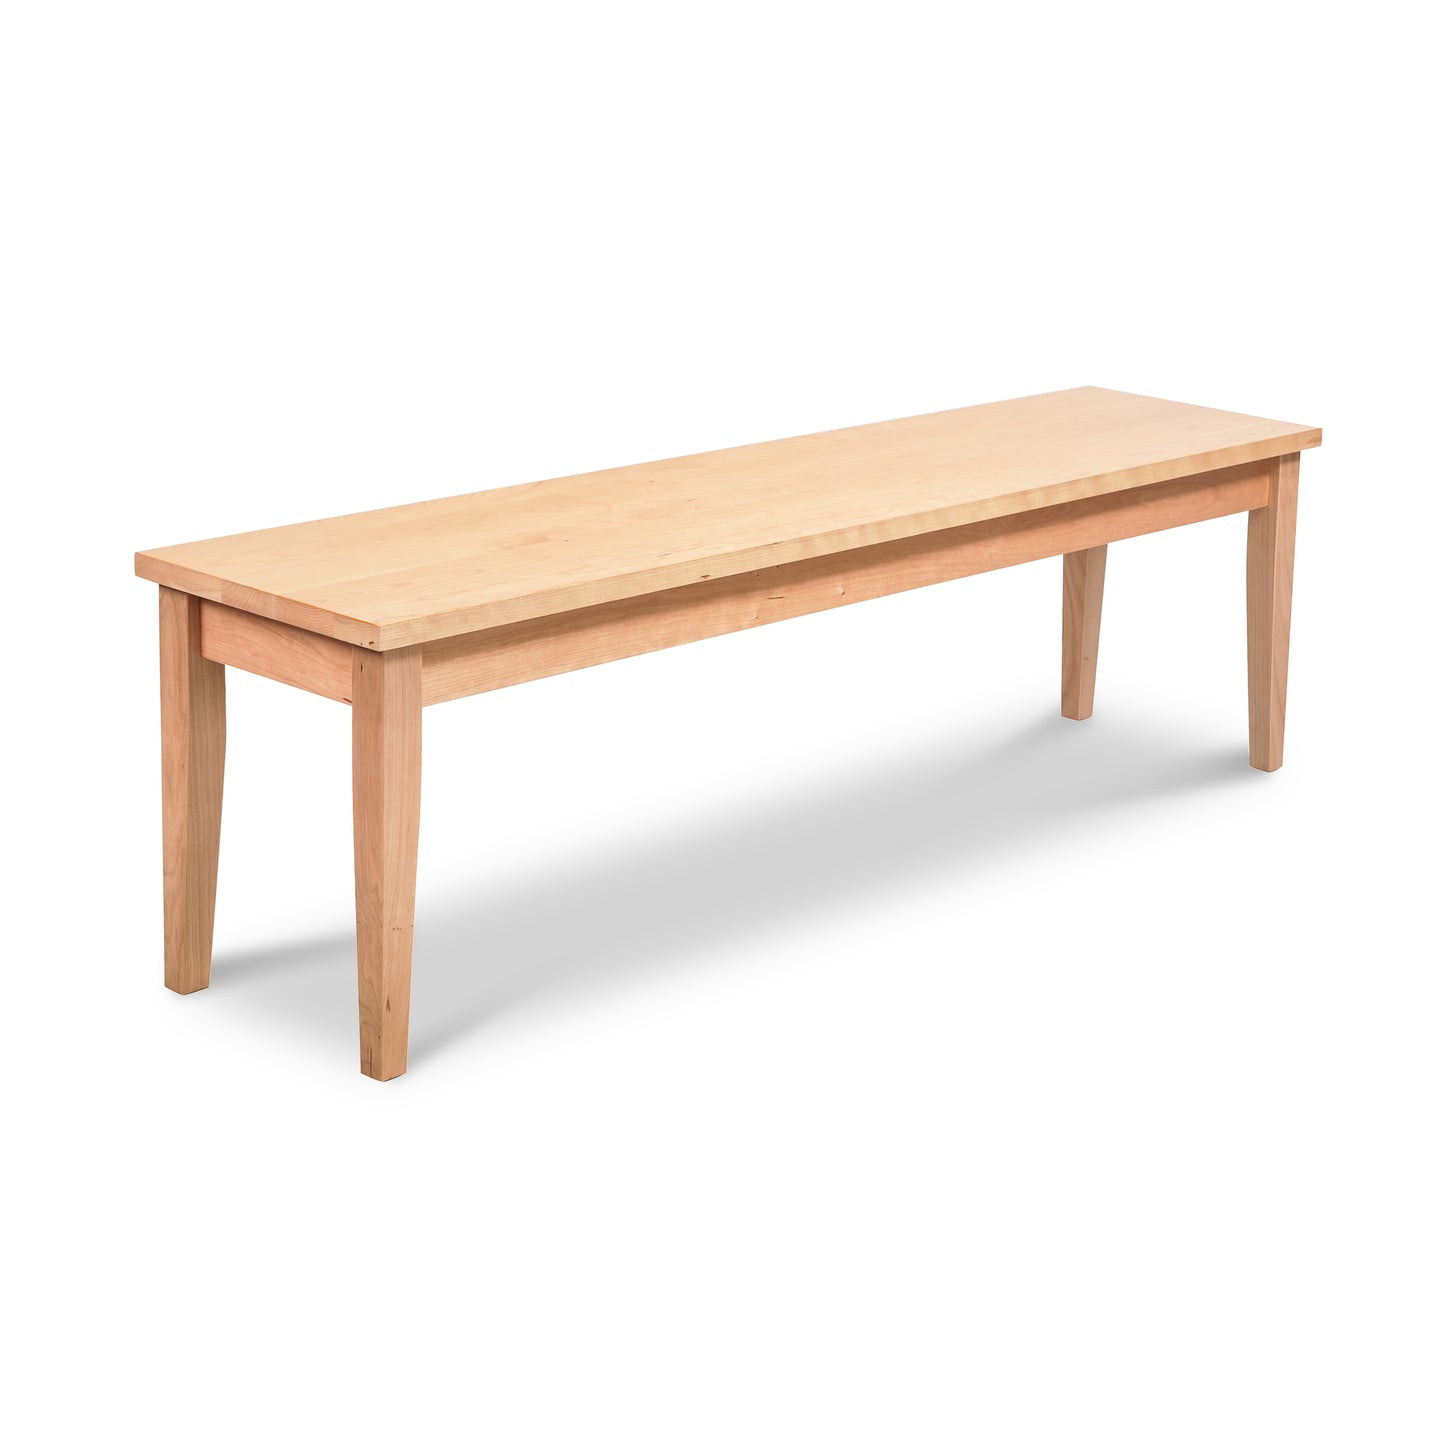 A Lyndon Furniture Classic Shaker bench handcrafted in Vermont. It is available in custom choices.